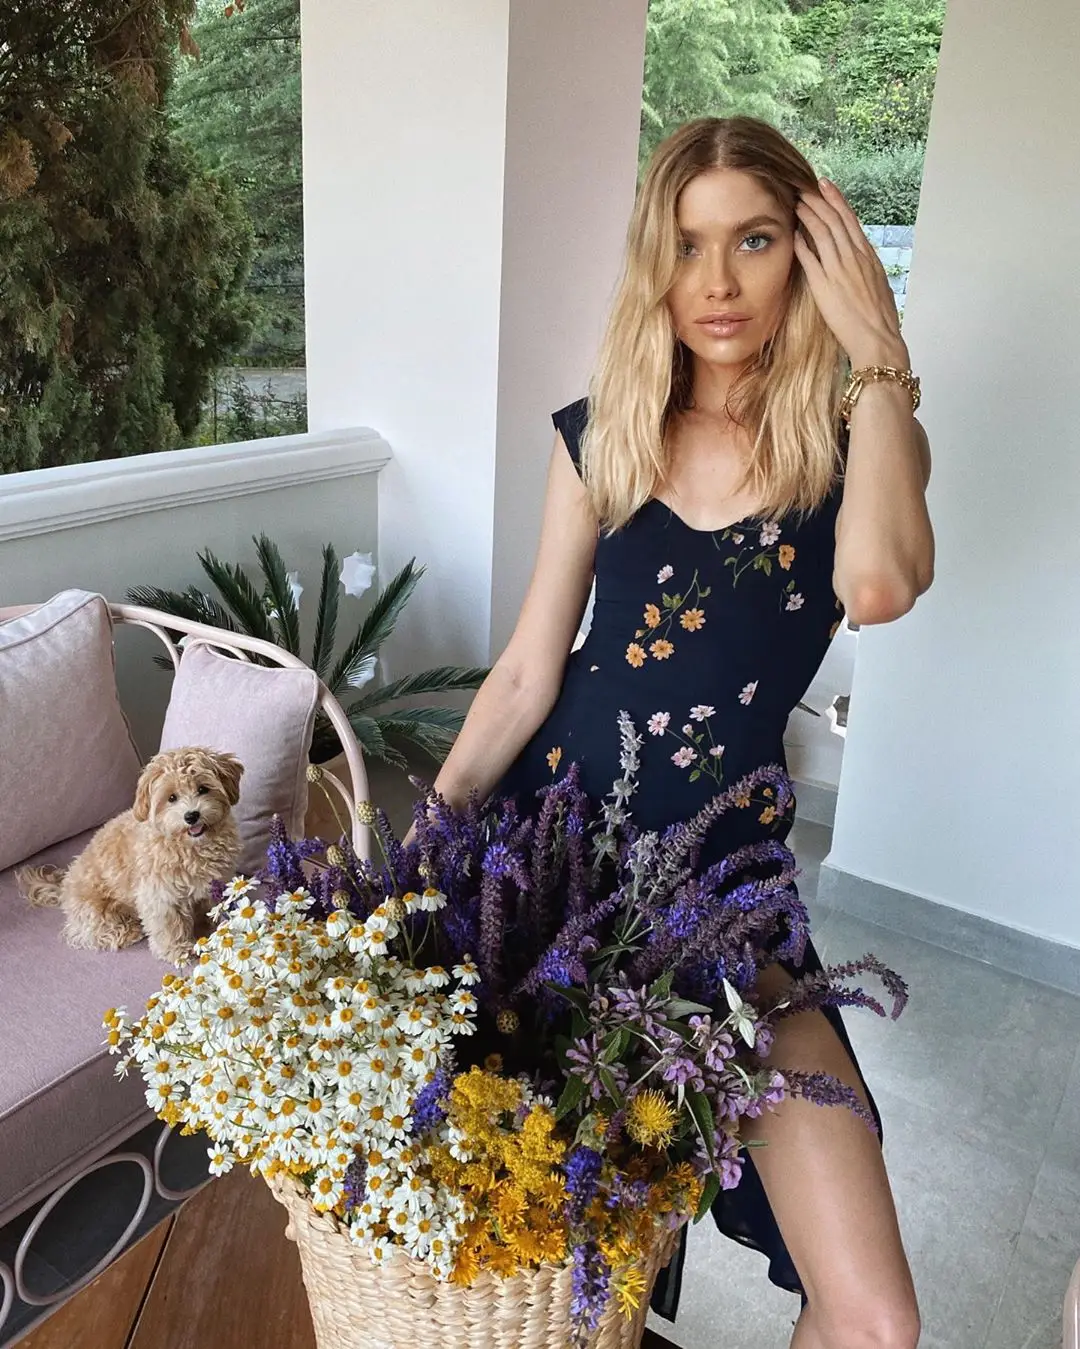 33 of Todays Captivating Flowers Inspo for Girls Who Love Having Flowers around ...